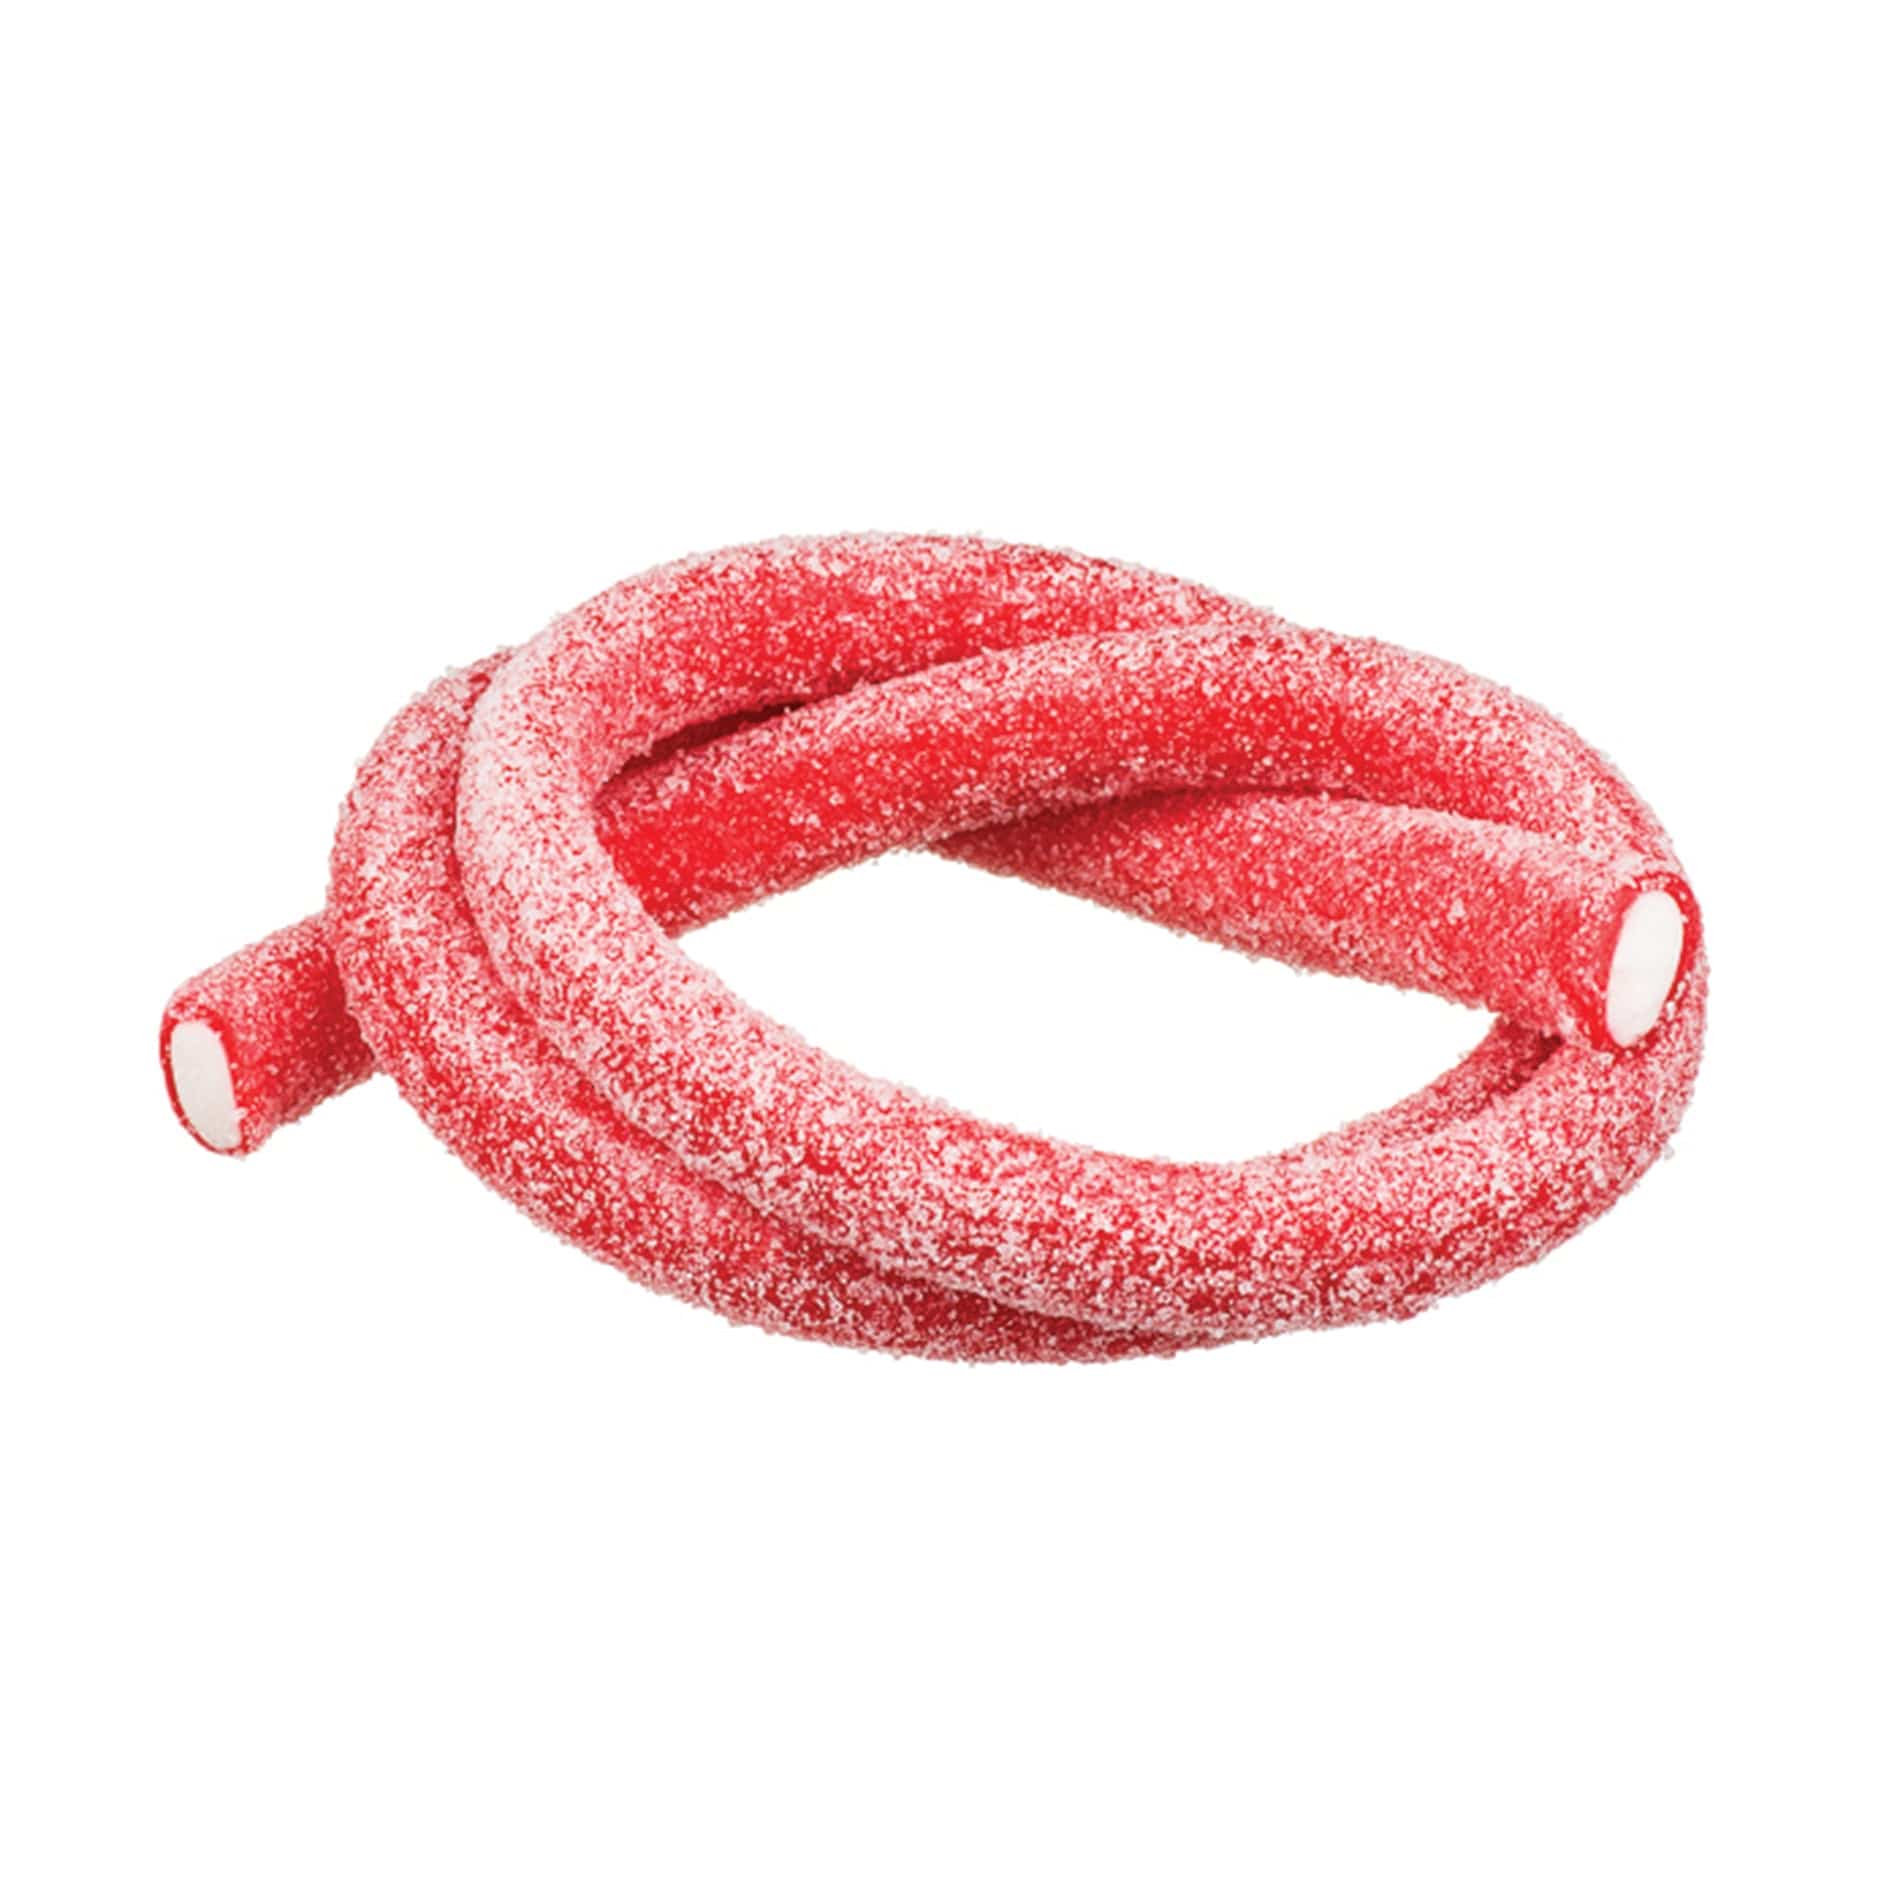 Novelty Concessions Gummy Rope SOUR STRAWBERRY / 1 Pack (30 pieces) Meeega Cables European Chewy Rope Candy - Box of 30 individually wrapped Meeega Cables, each over 2-feet long cups with lids and straws